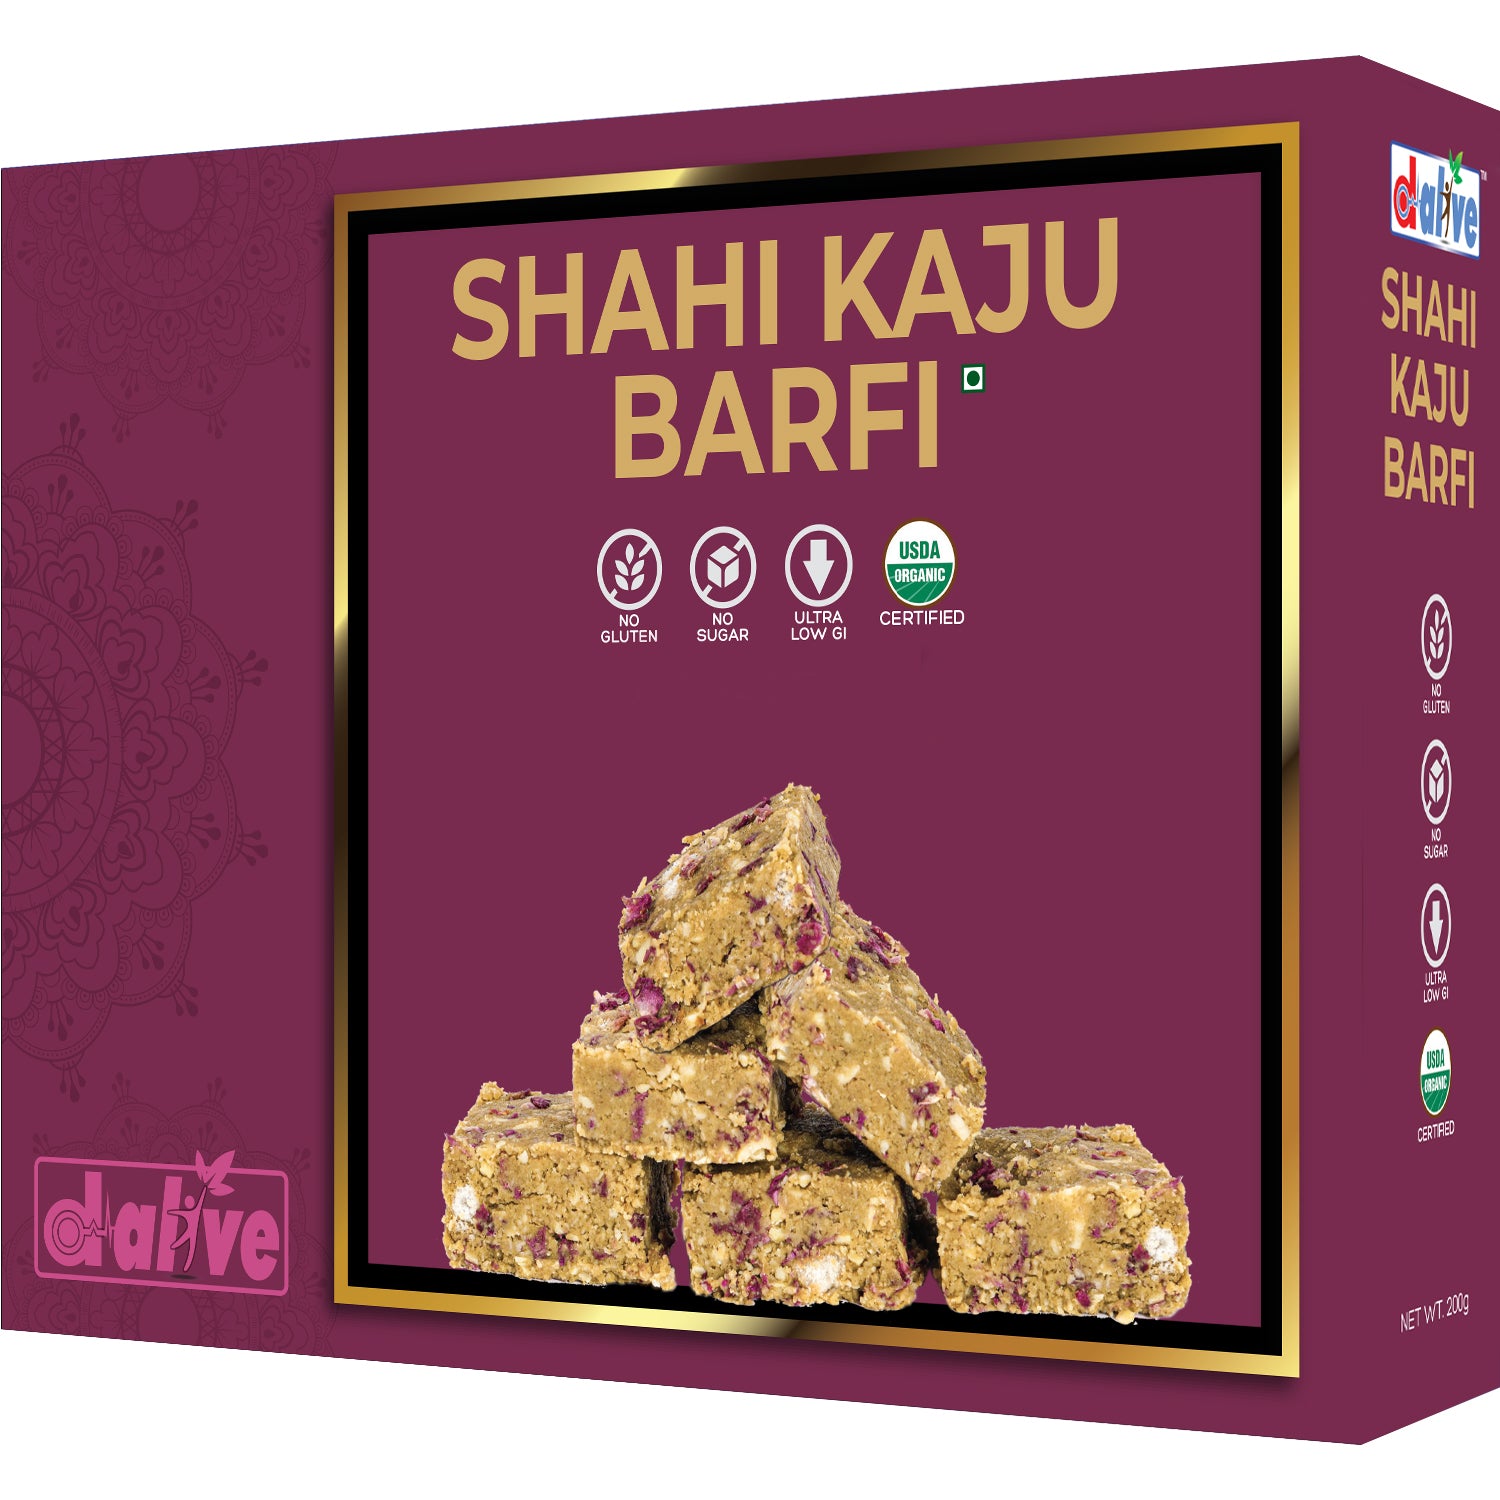 D-Alive Shahi Kaju Barfi (Indian Sweets, Mithai) - 200g (USDA Organic Certified, No Gluten, No Added Sugar, No Artificial Sweeteners, Ultra Low Carb, Keto & Paleo Friendly, No Additives, No Preservatives, No Emulsifiers, Low Carb & High Protein)